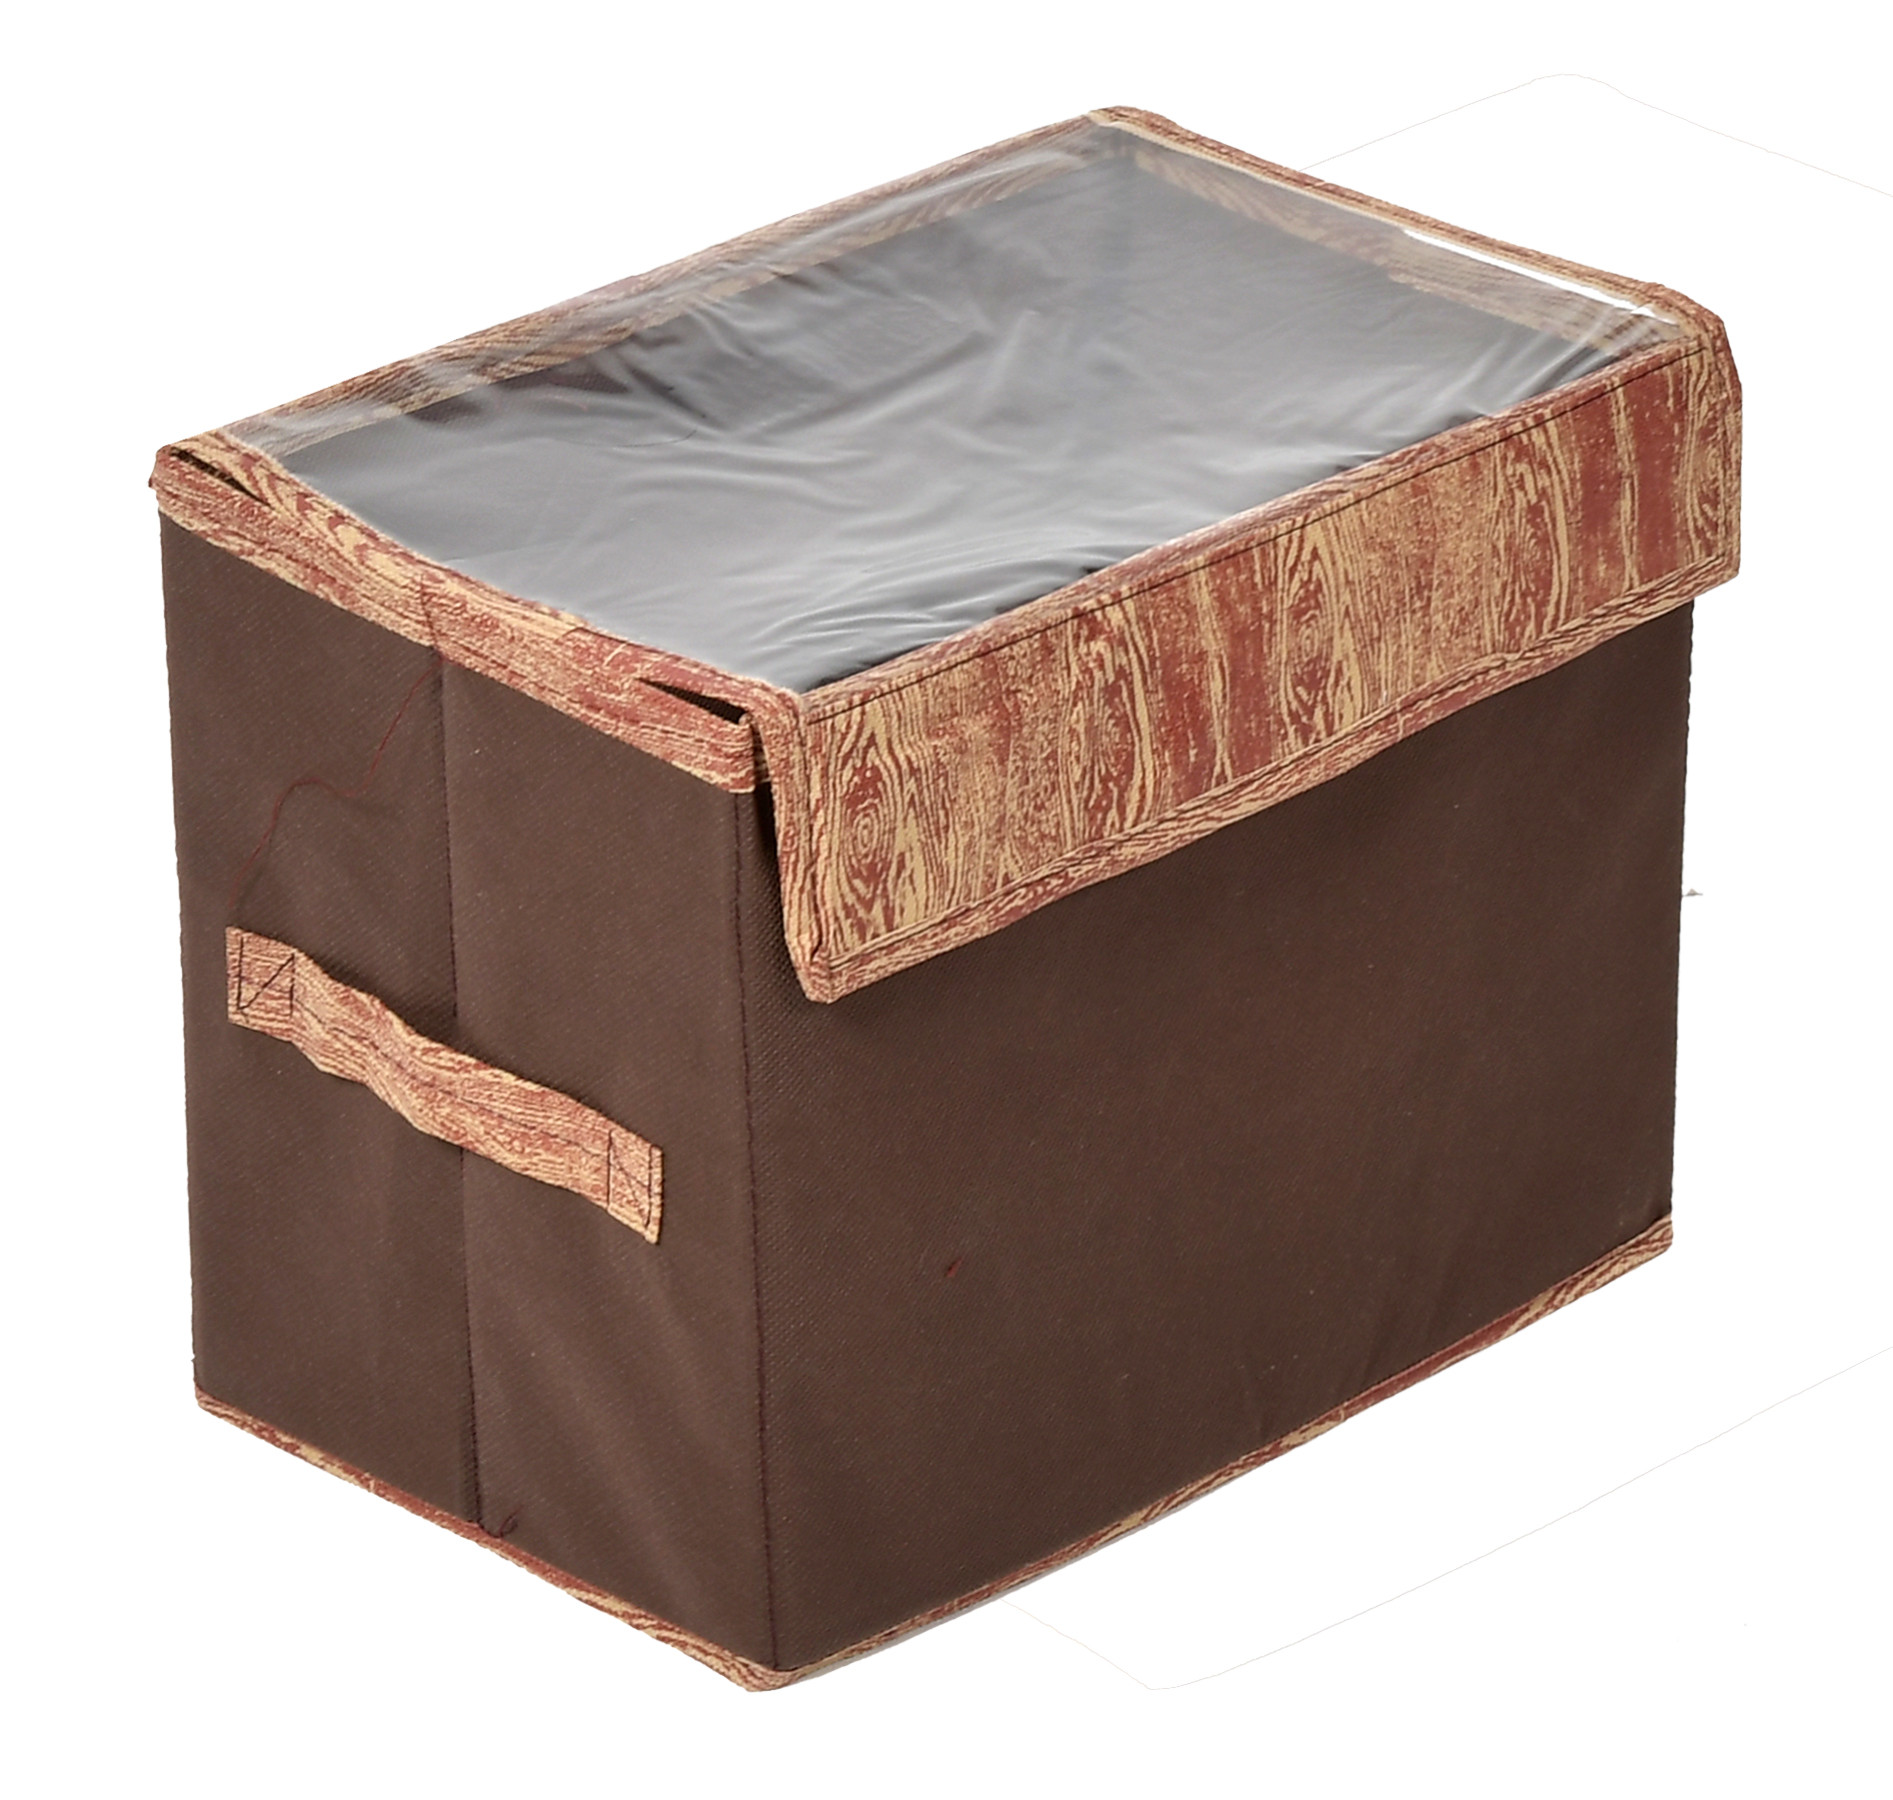 Kuber Industries Wooden Design Multiuses Small Non-Woven Storage Box/Organizer With Tranasparent Lid (Brown) -44KM0429